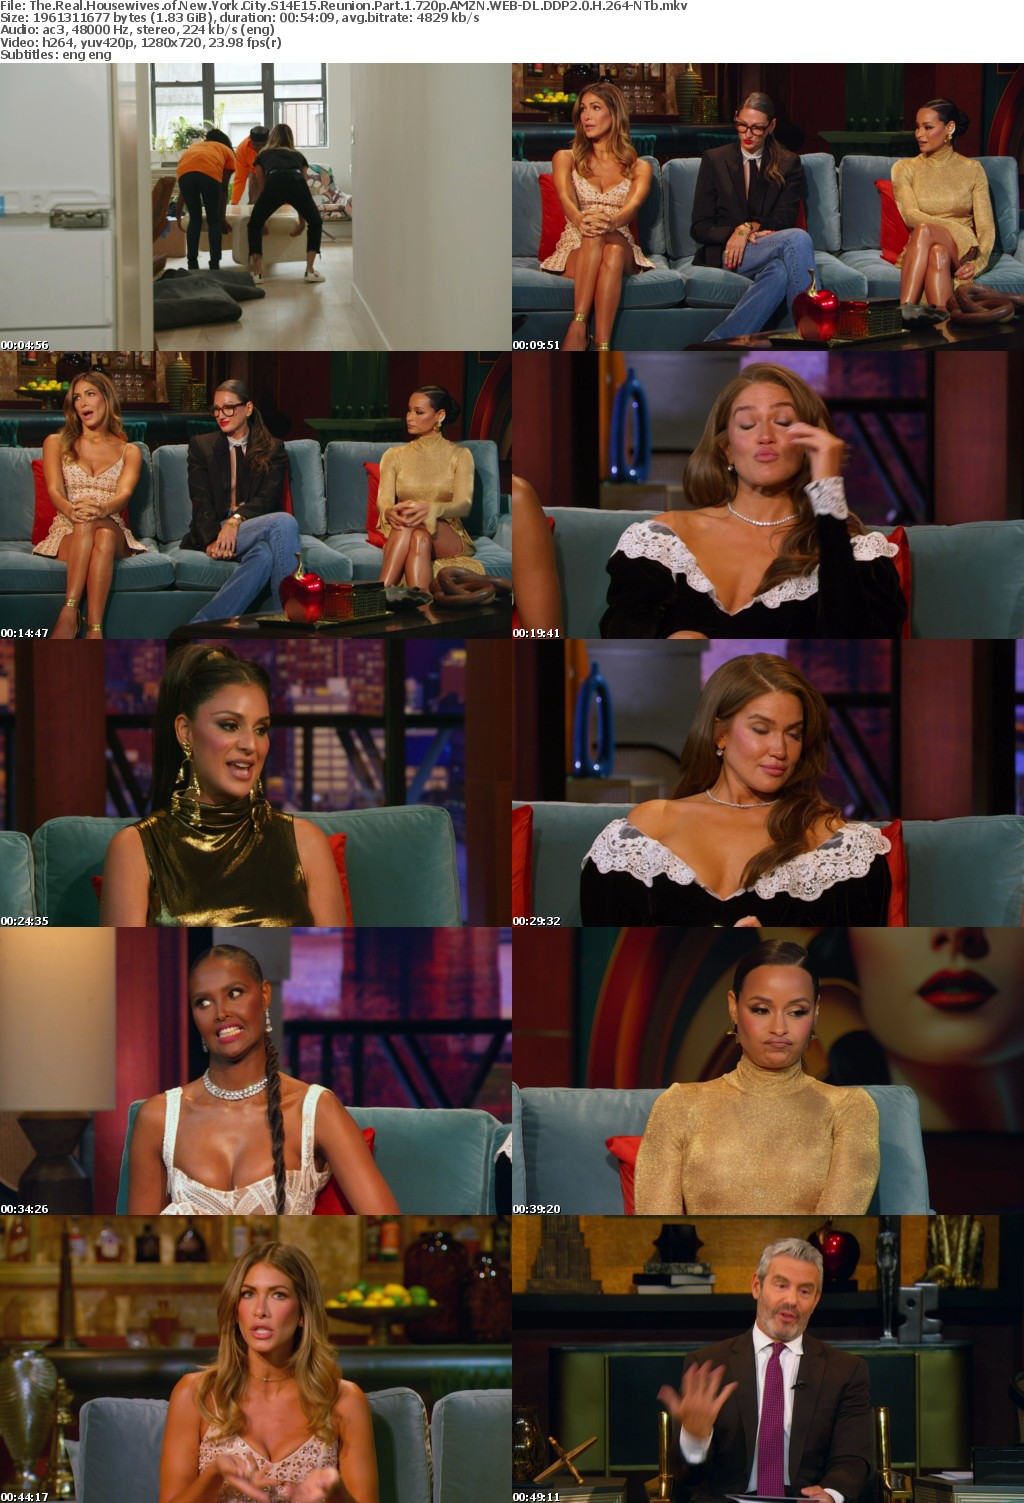 The Real Housewives of New York City S14E15 Reunion Part 1 720p AMZN WEB-DL DDP2 0 H 264-NTb